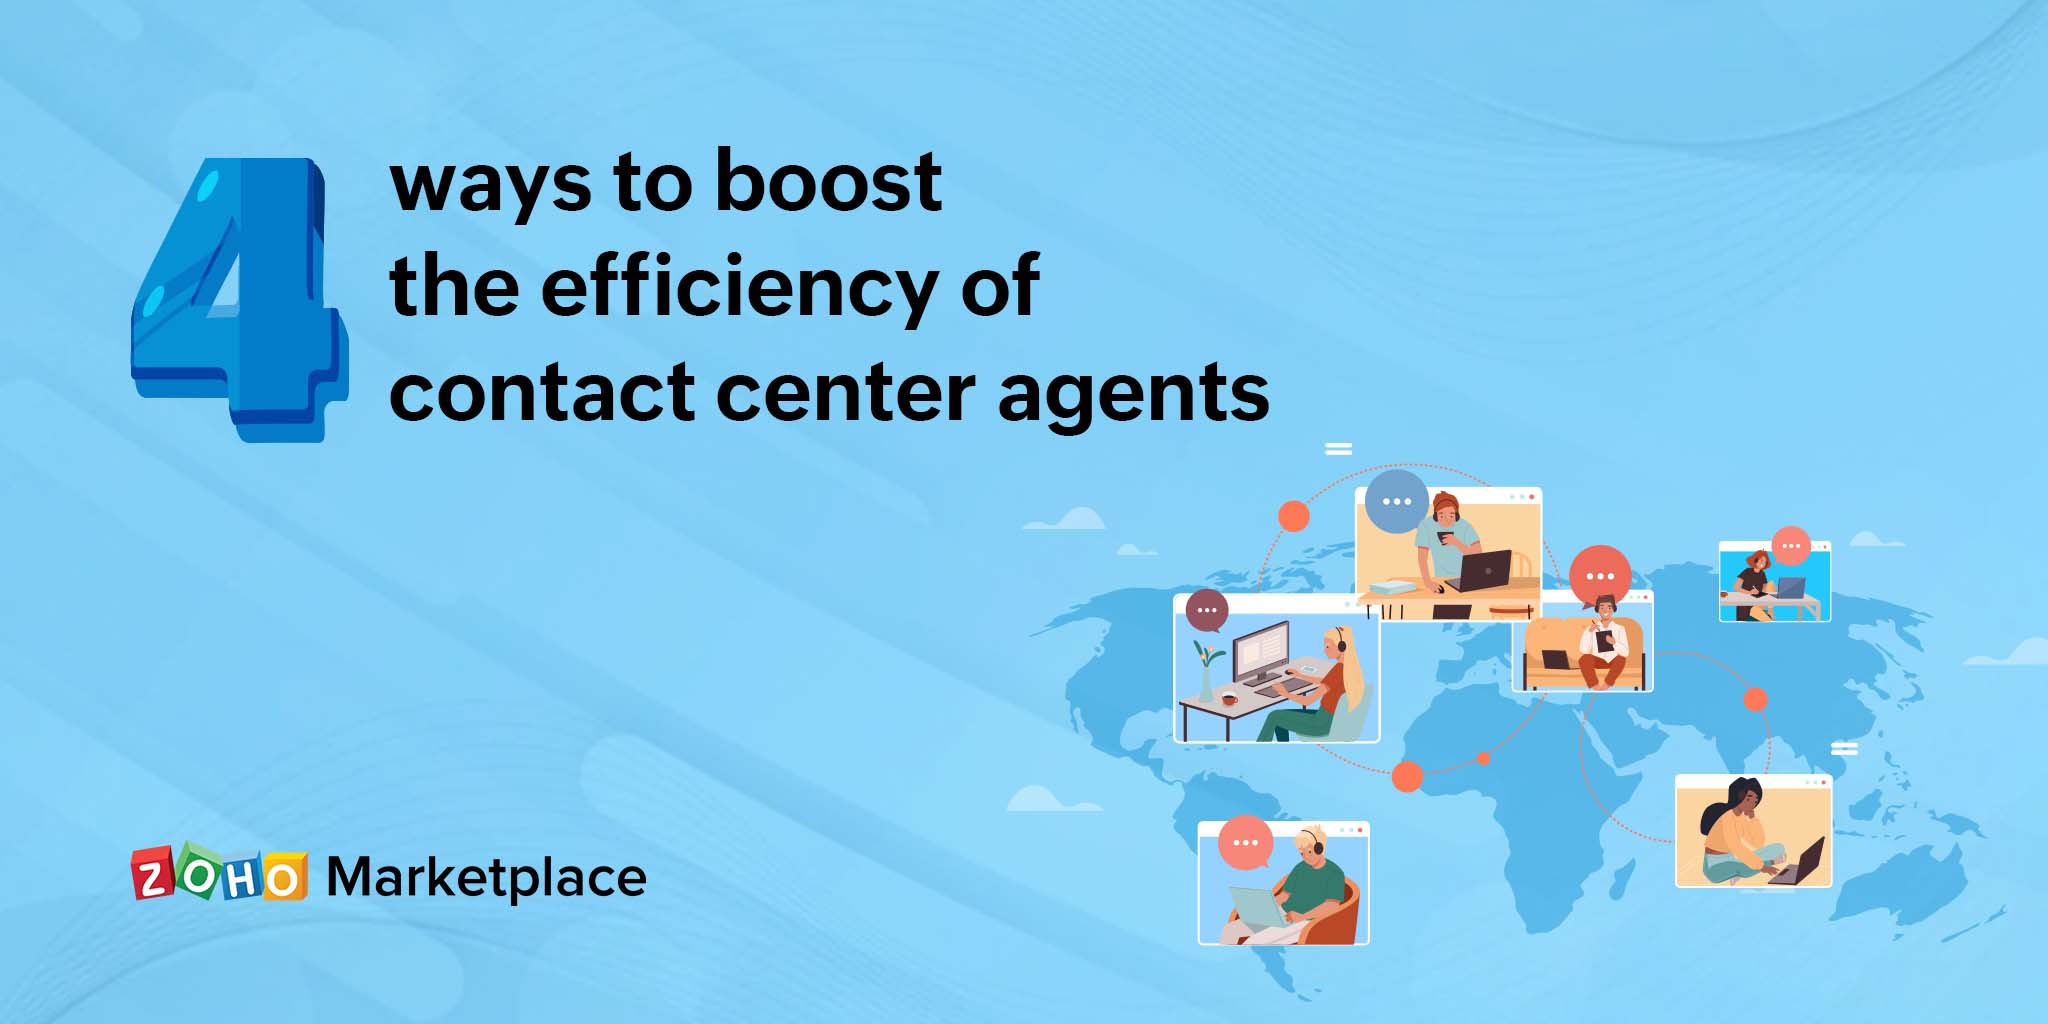 ProTips: 4 ways to boost the efficiency of contact center agents (remote work special)